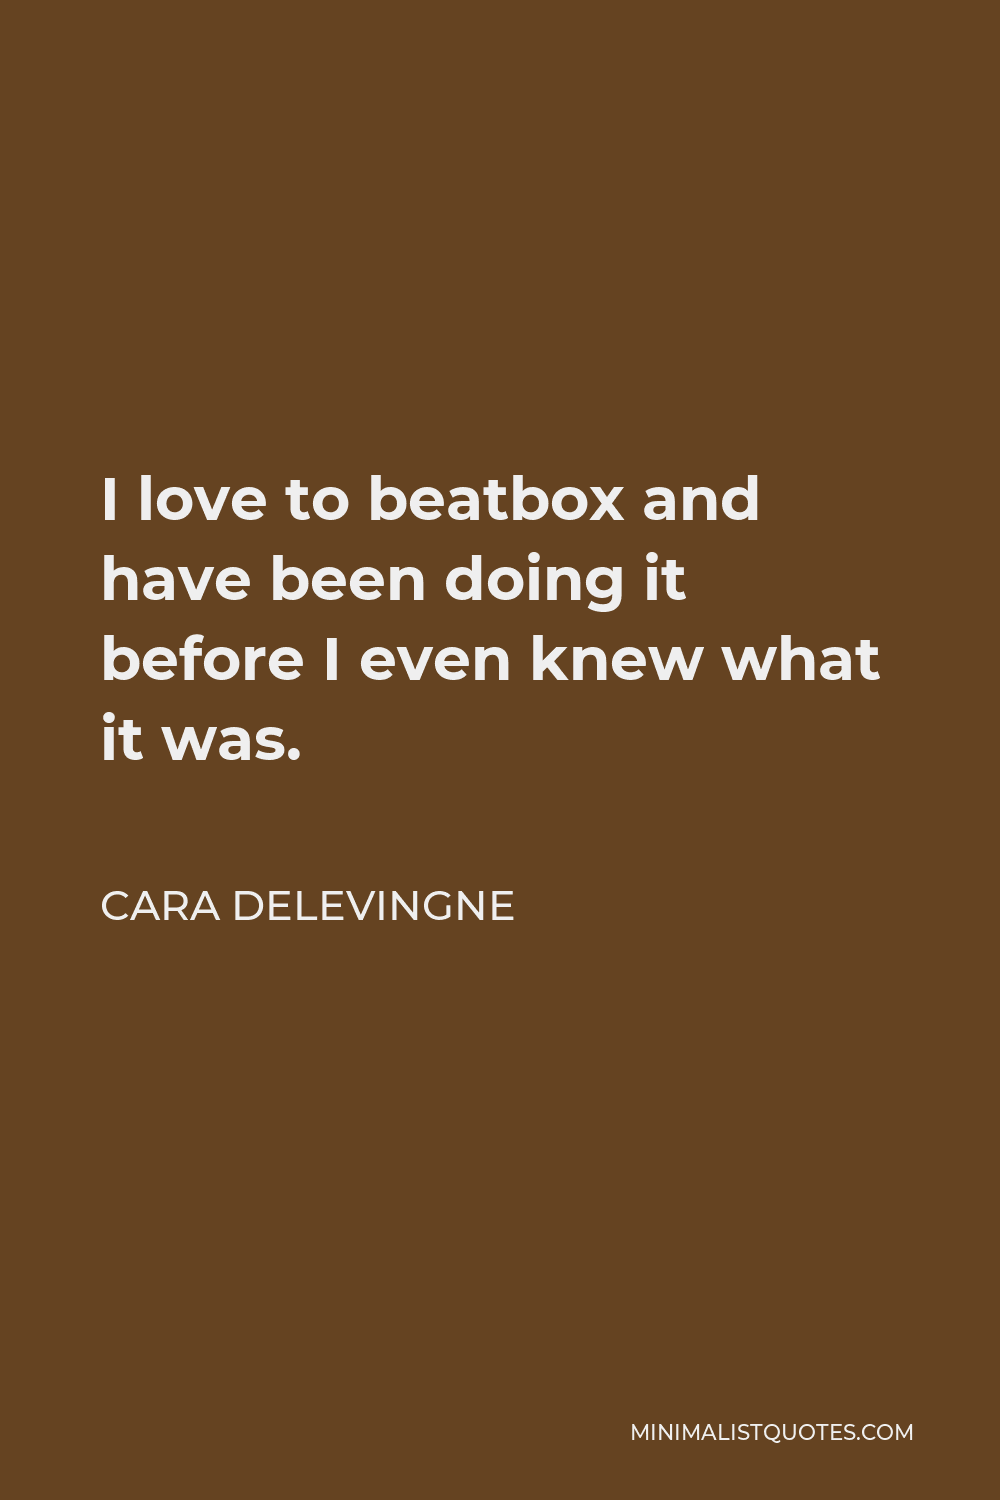 Cara Delevingne Quote - I love to beatbox and have been doing it before I even knew what it was.